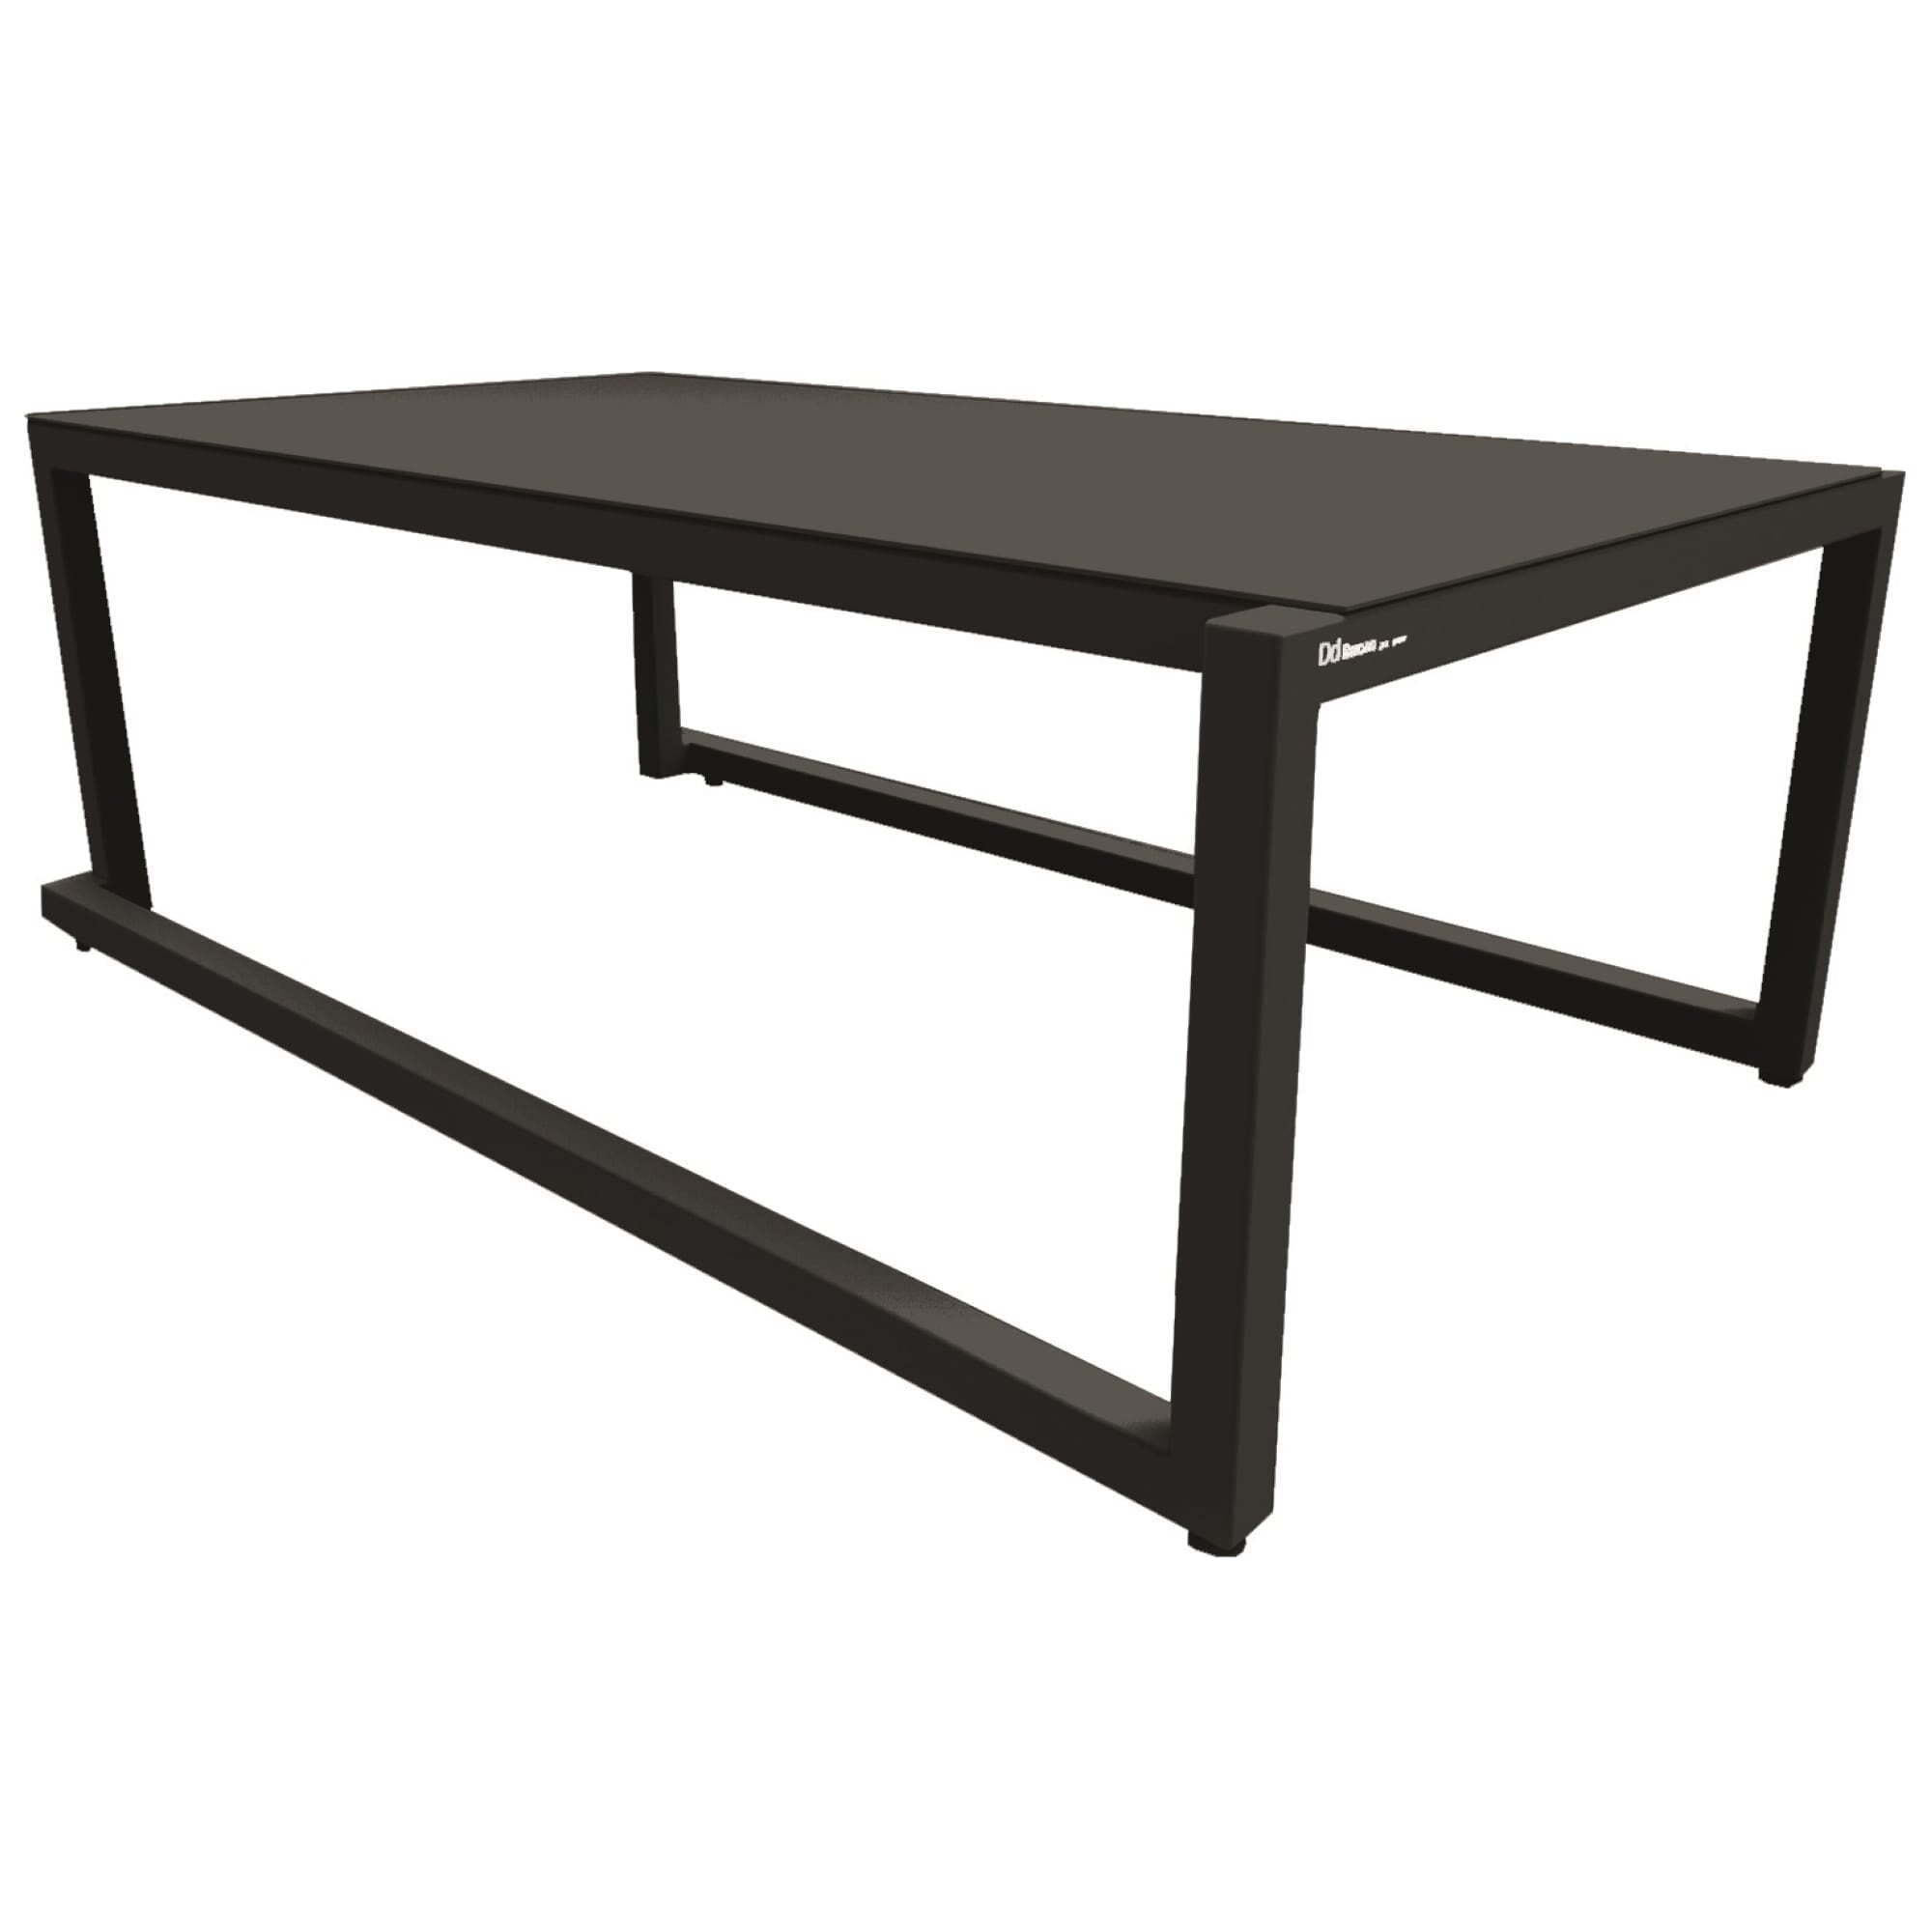 Resol Milano coffee table indoors, outdoors 101x60 black